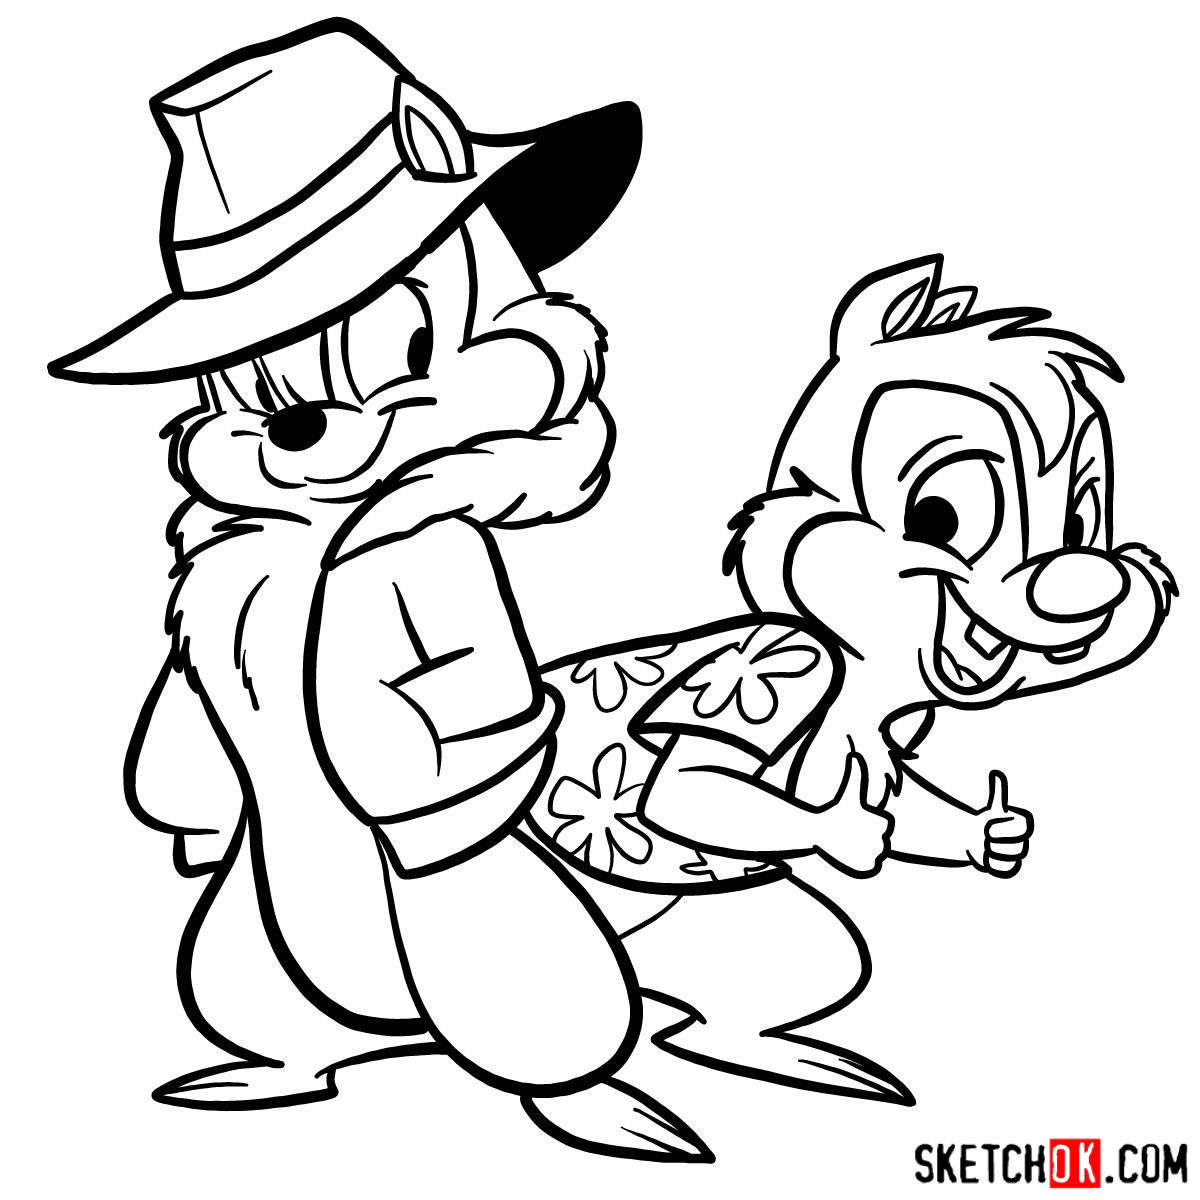 How to draw Chip and Dale together - step 20